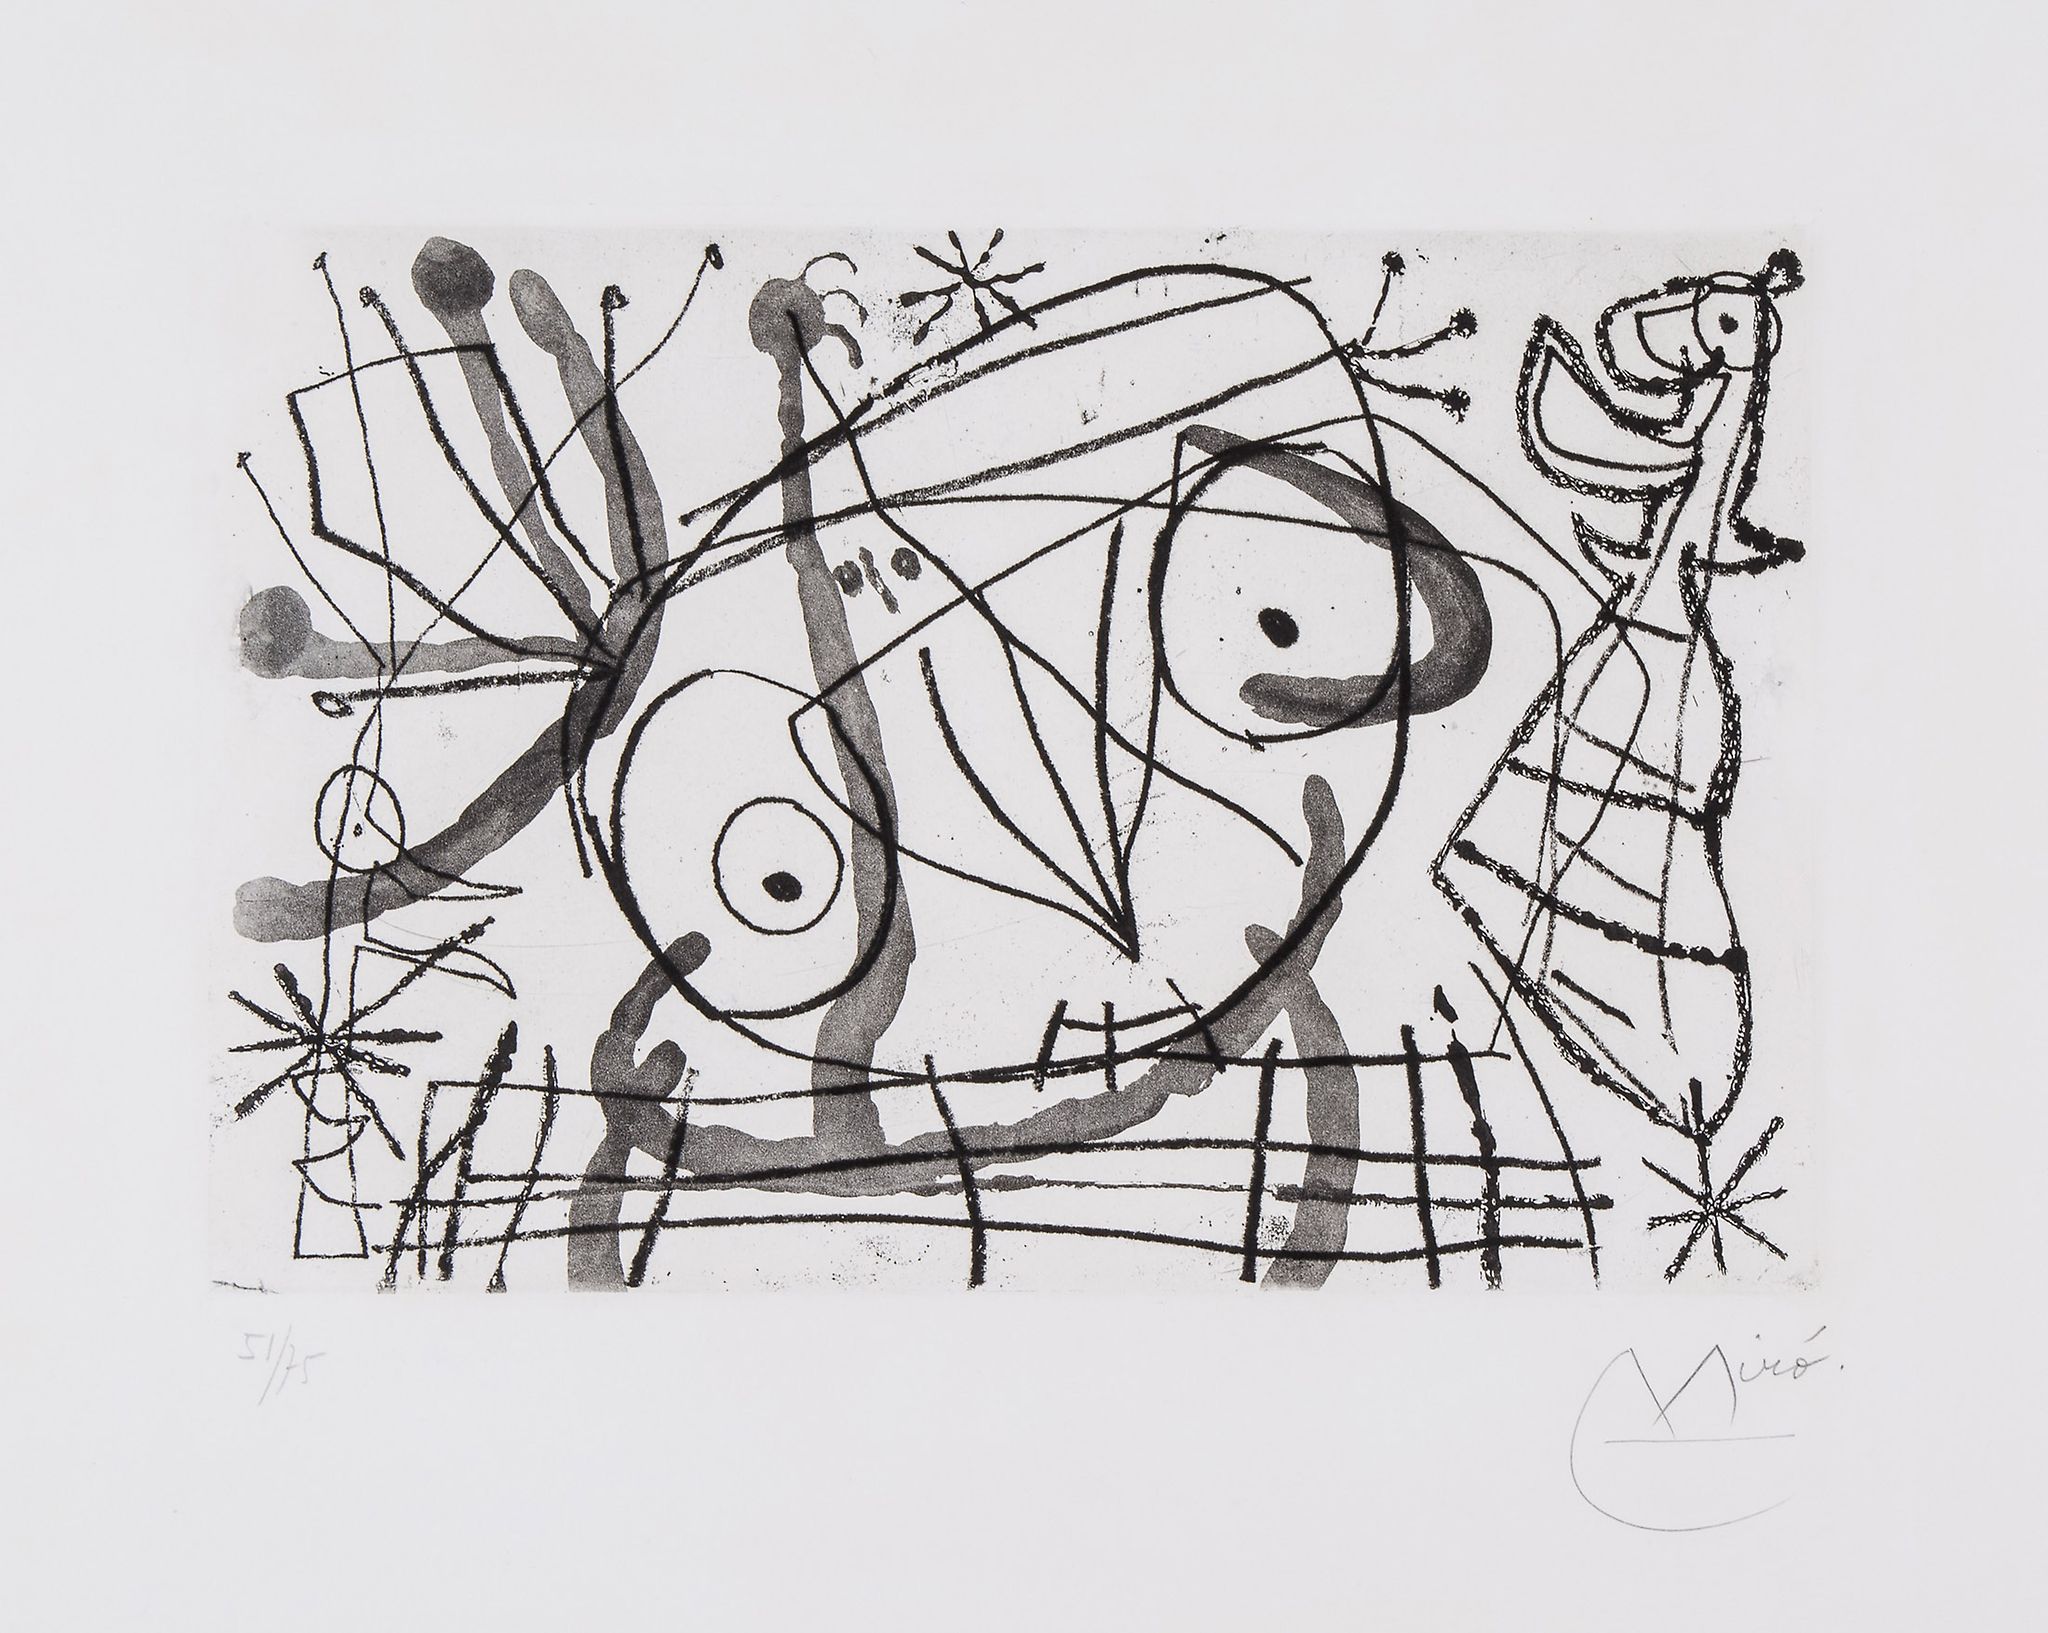 **Joan Miró (1893-1983) - Fissures (D.465) etching and aquatint, 1969, signed in pencil and numbered